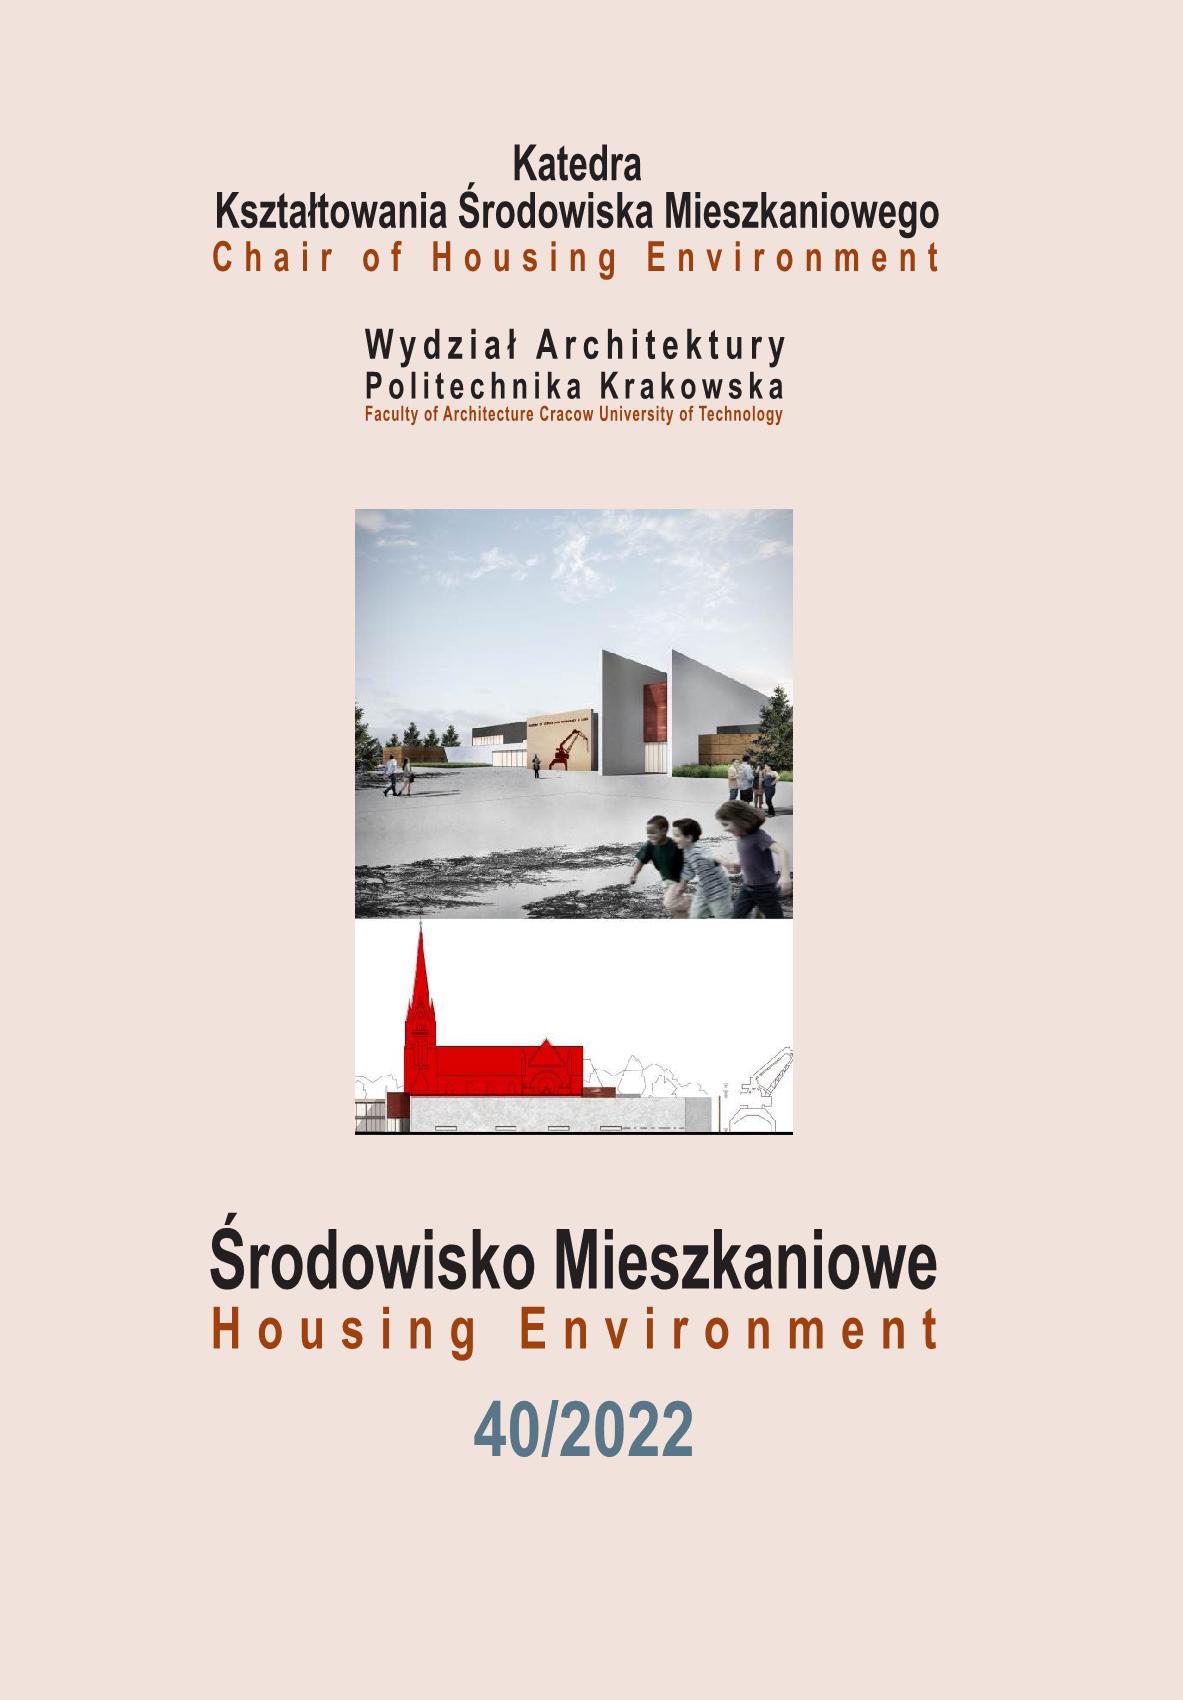 Spatial distribution of places of religious worship in the housing environment of contemporary Krakow